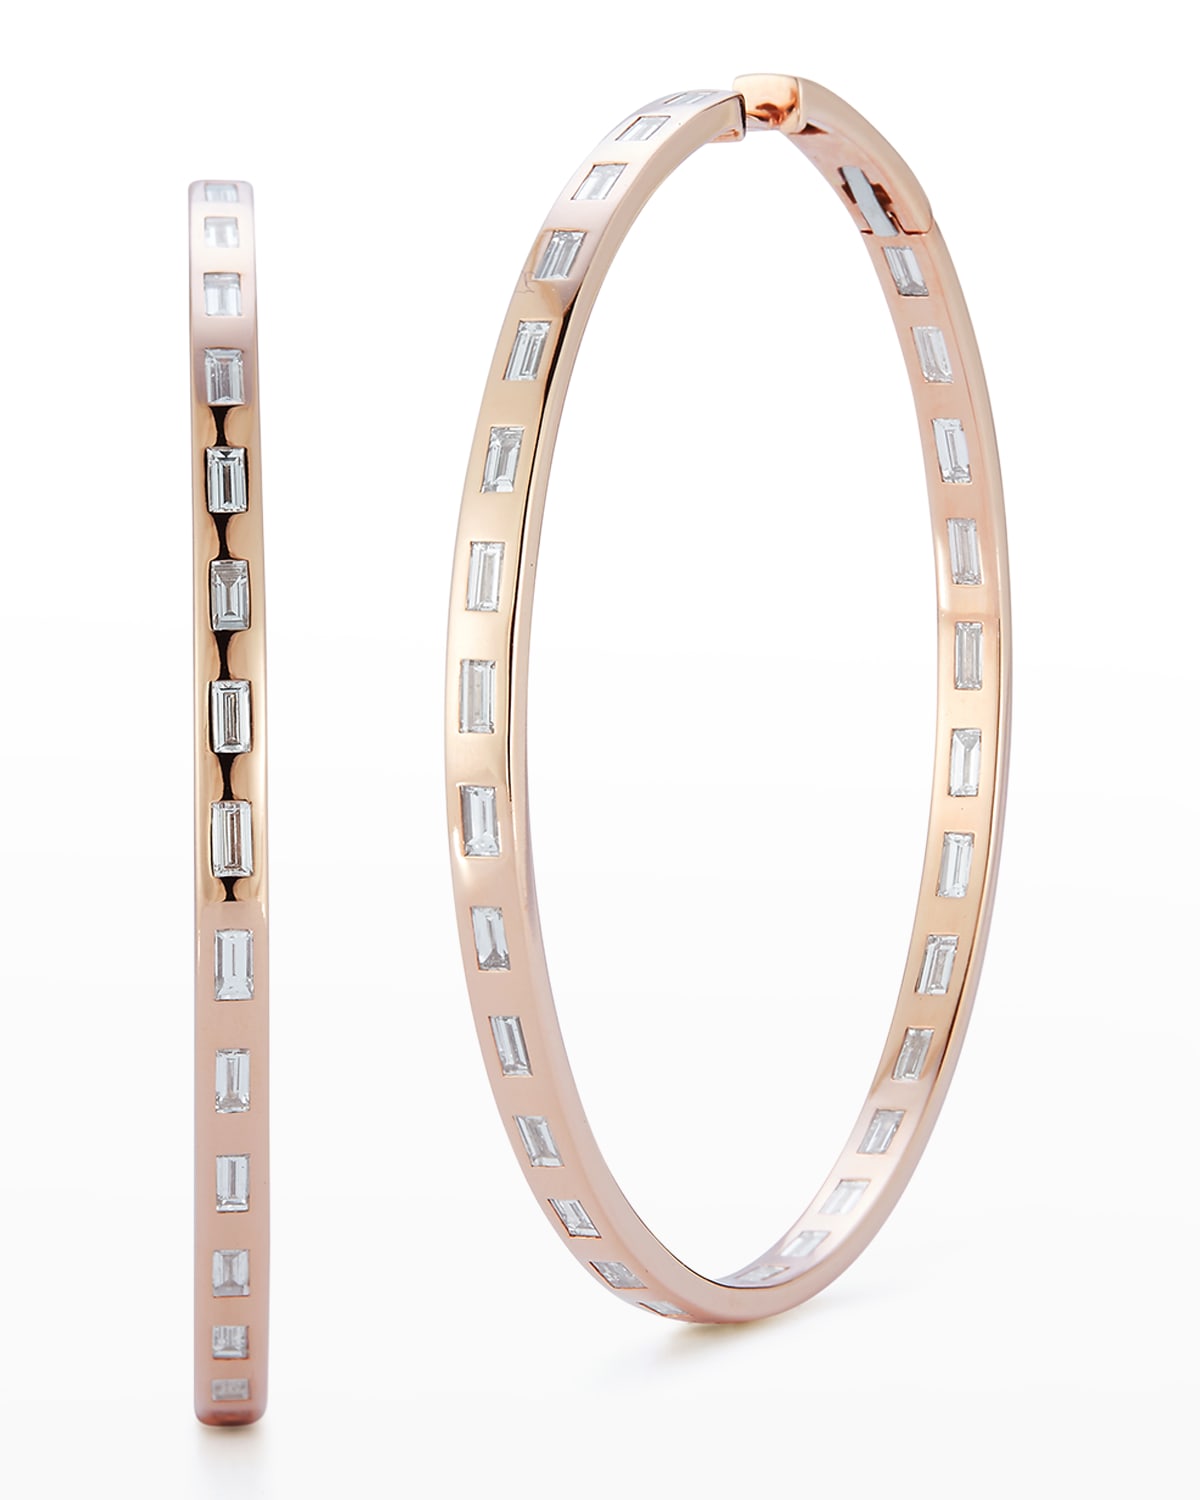 WALTERS FAITH OTTOLINE ROSE GOLD LARGE HOOP EARRINGS WITH GYPSY-SET BAGUETTE DIAMONDS